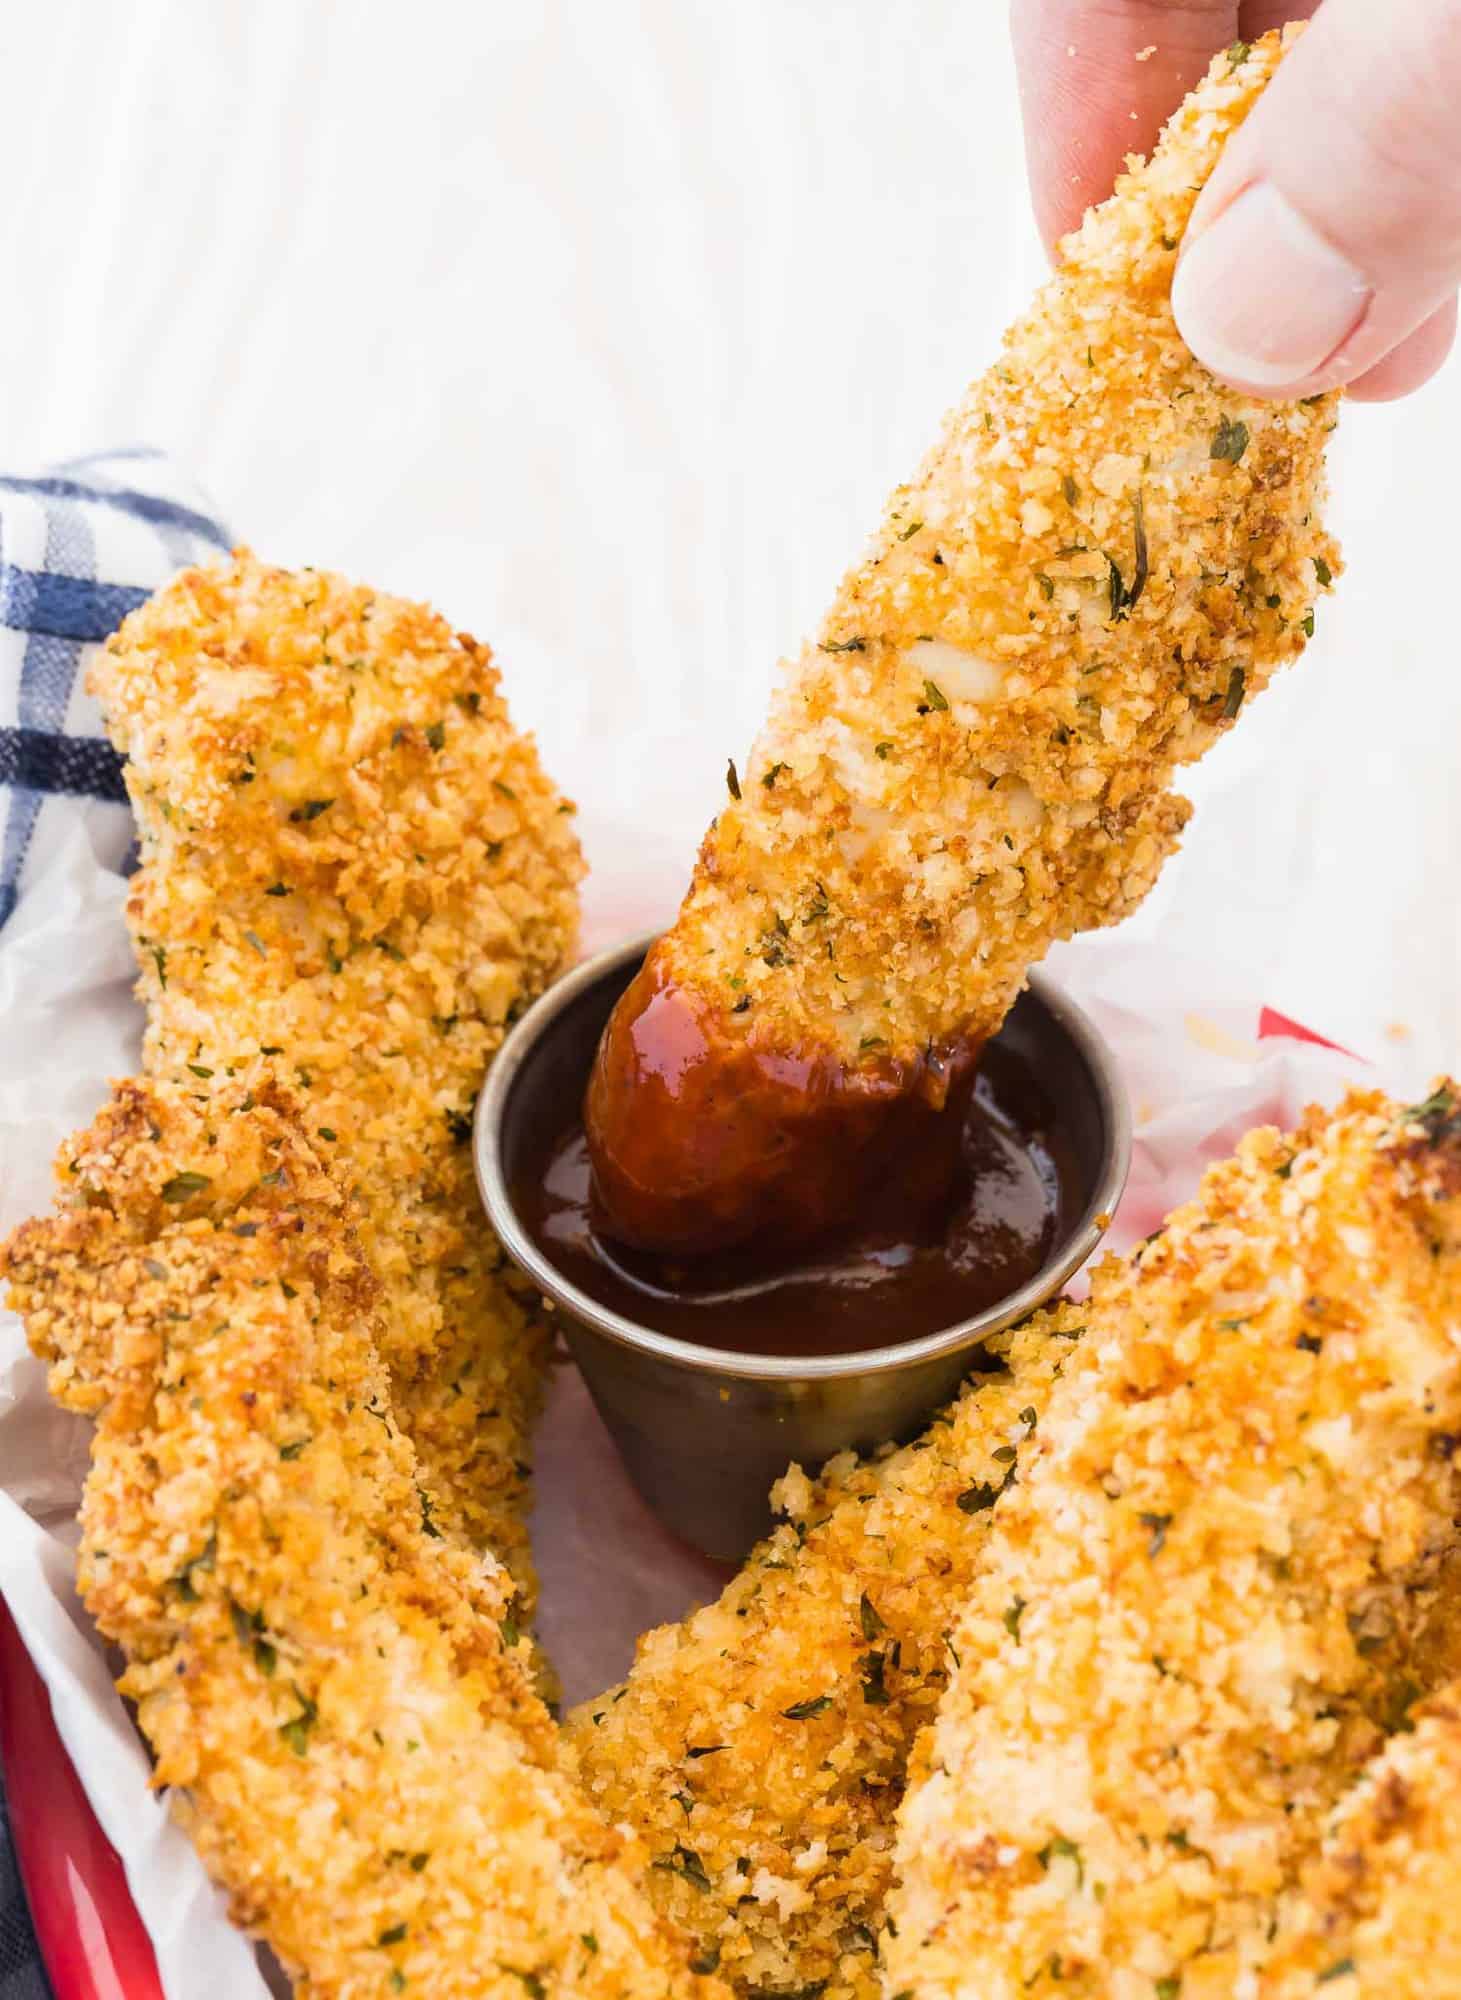 Chicken tenders in a basket, one being dipped in sauce.